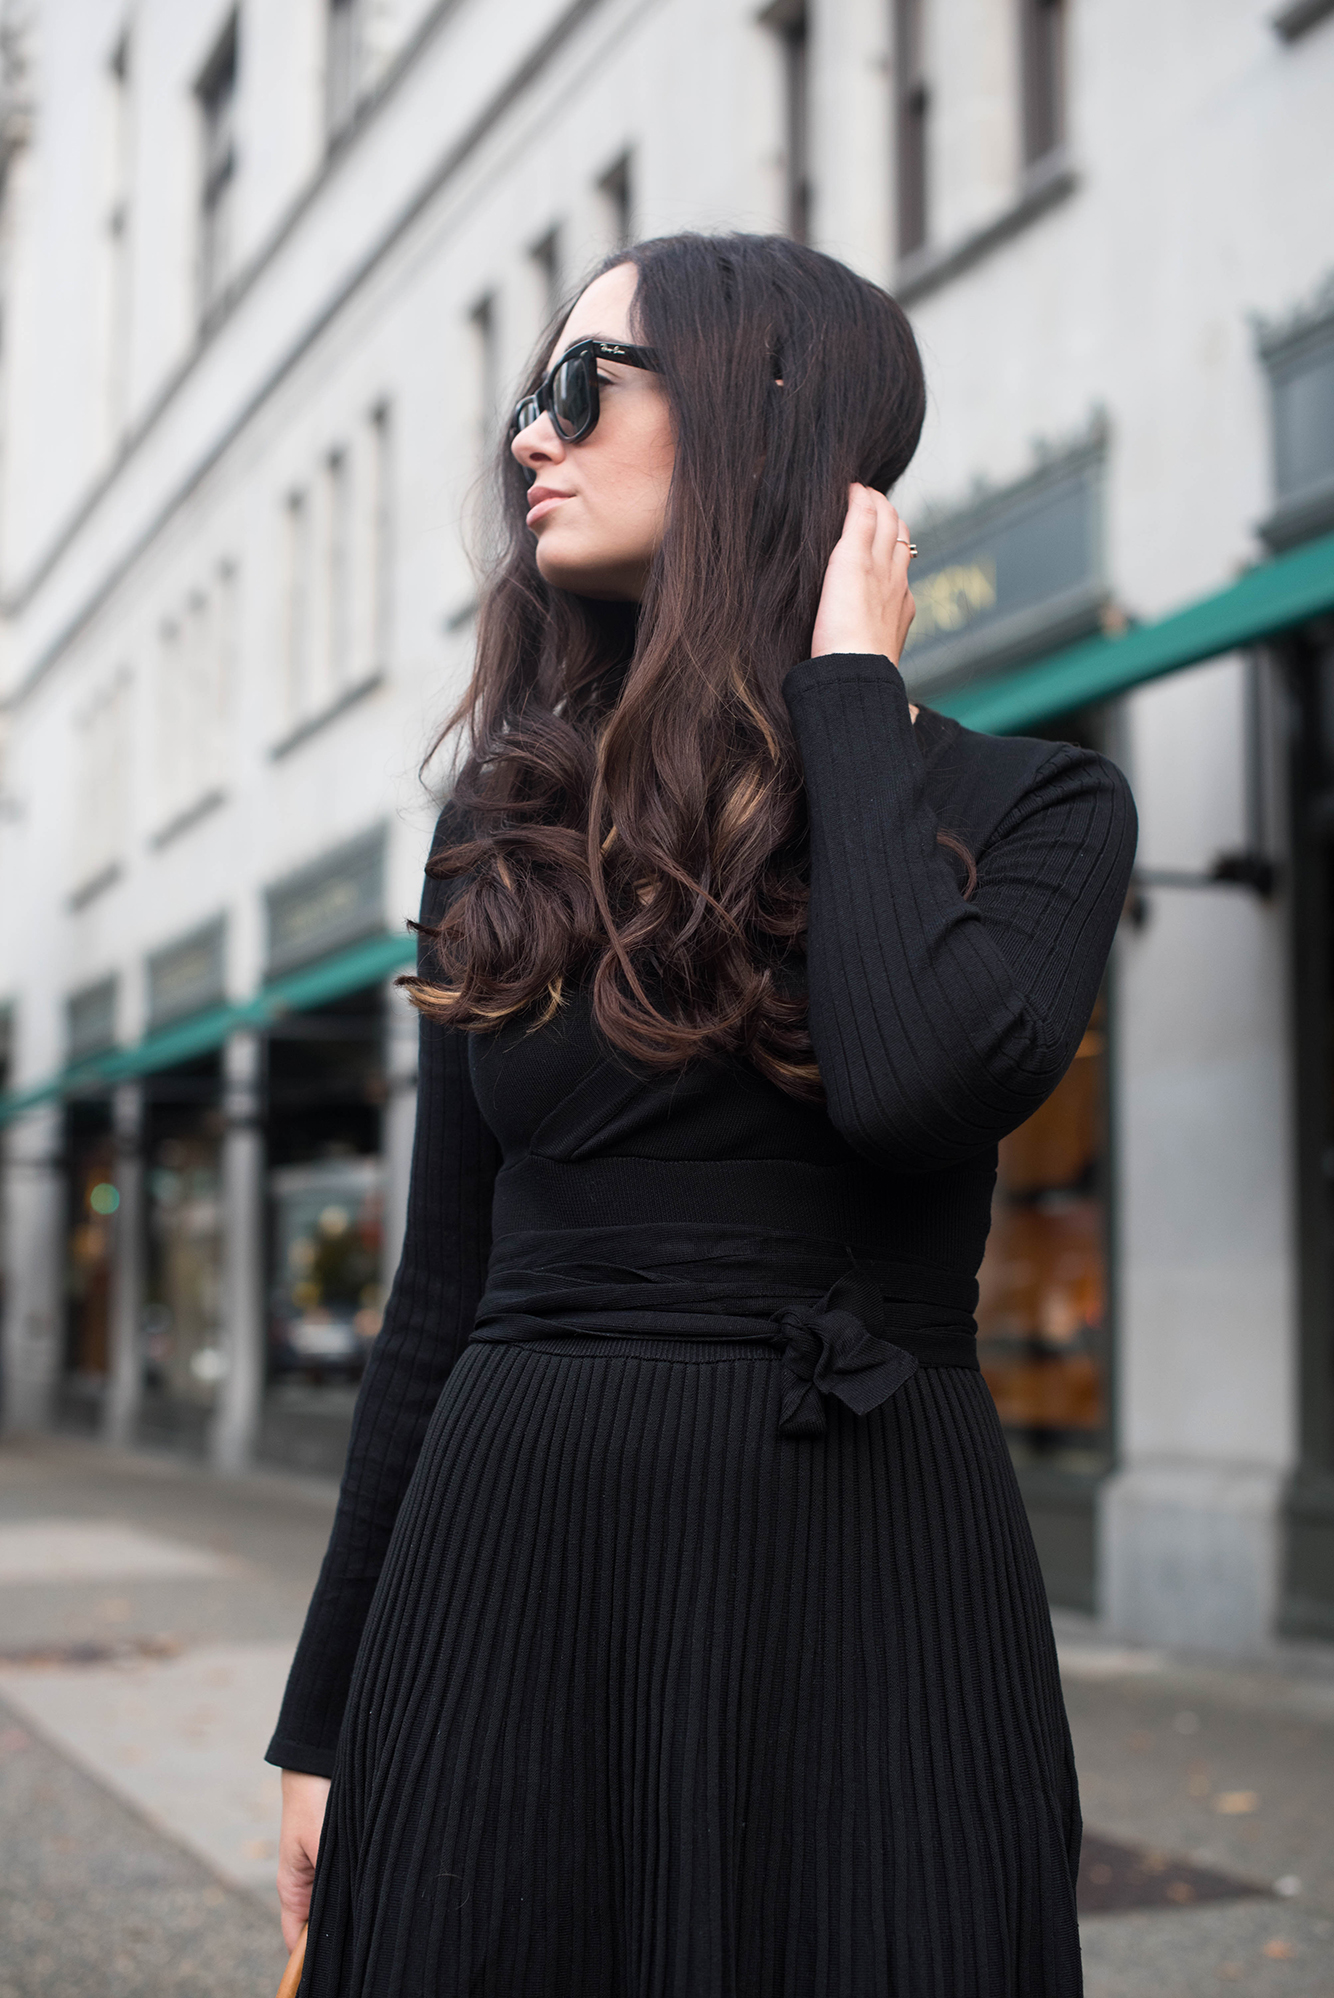 coco-and-vera-top-vancouver-style-blog-top-canadian-style-blog-top-blogger-portrait-cee-fardoe-brunette-rayban-sunglasses-stylewe-dress